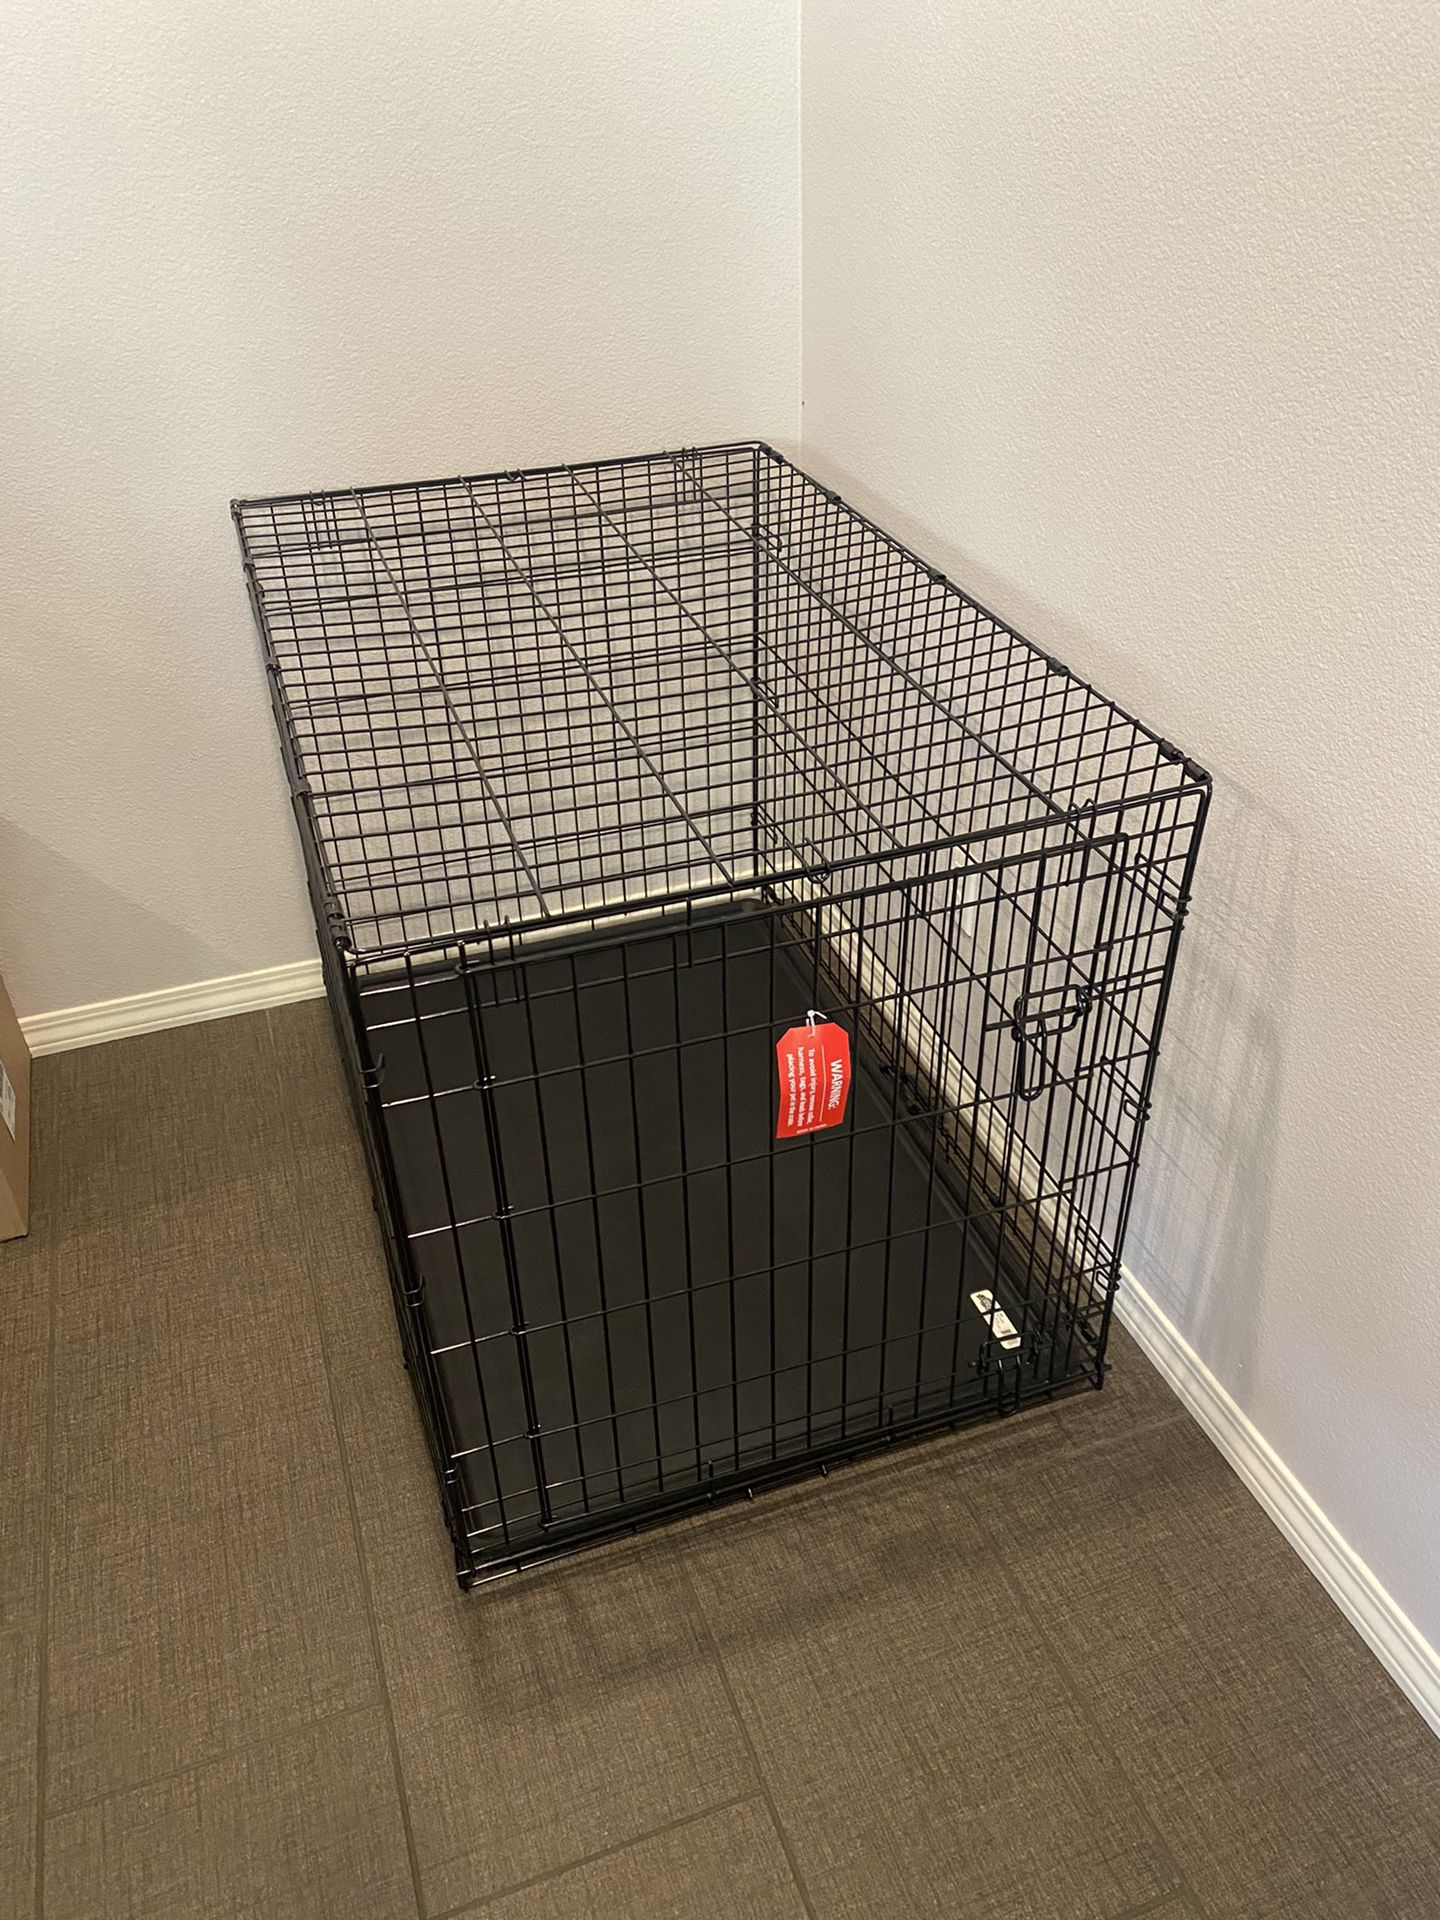 Dog crate / kennel - Large